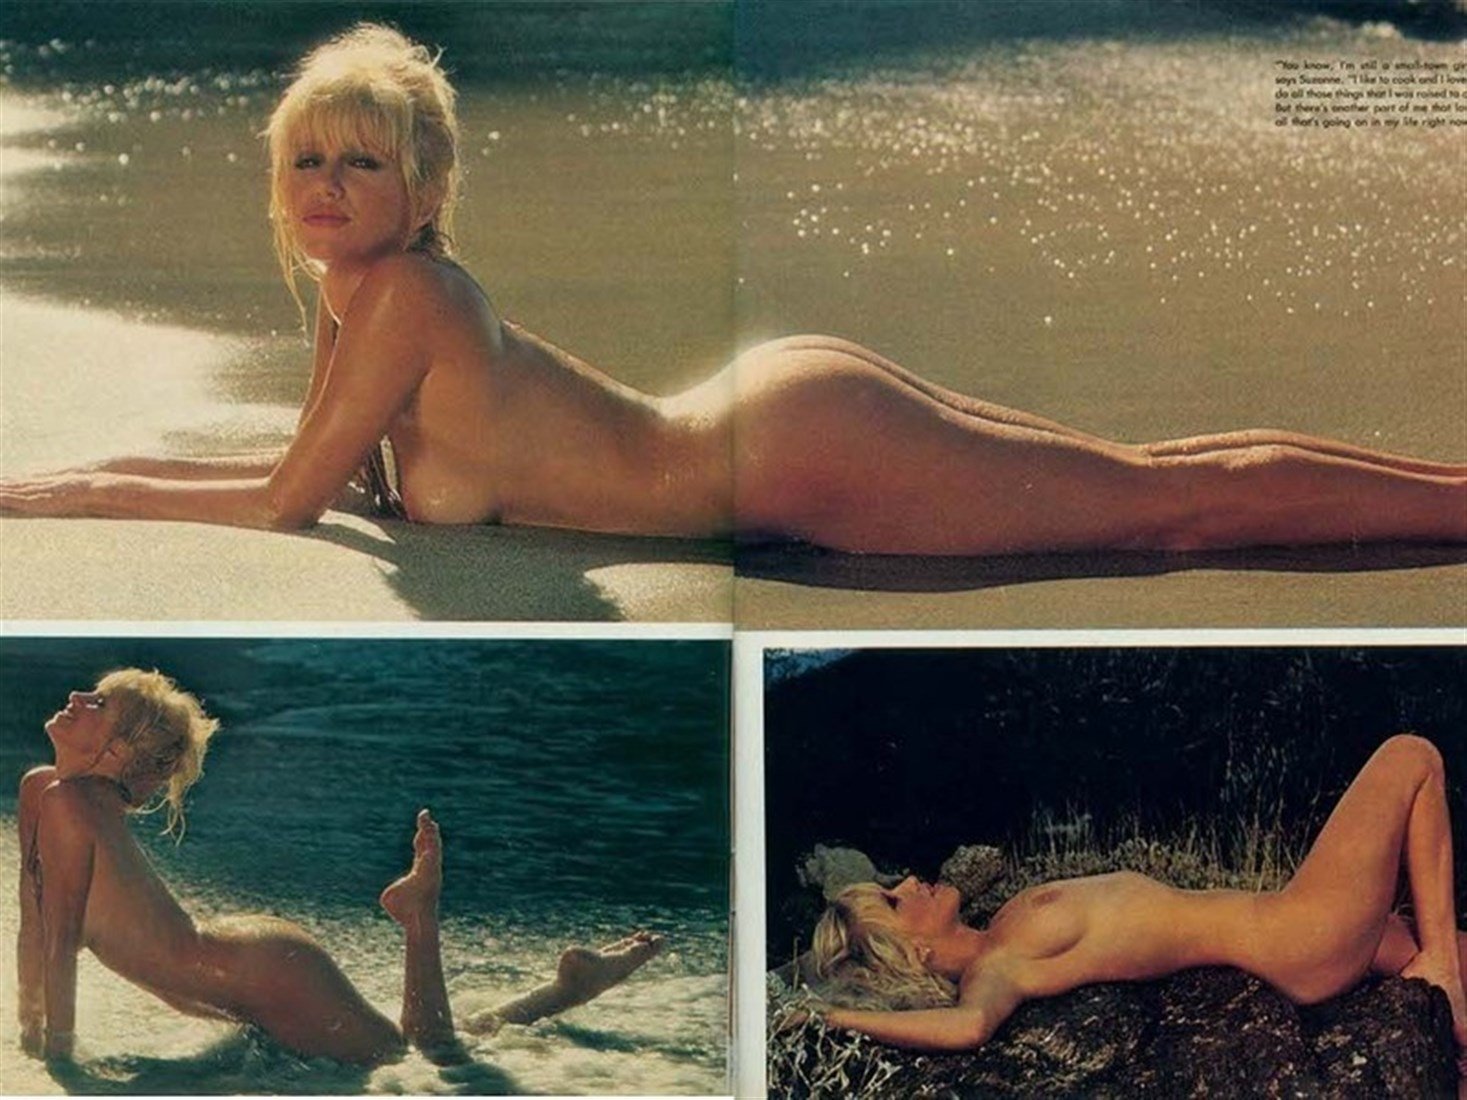 Suzanne somers nude